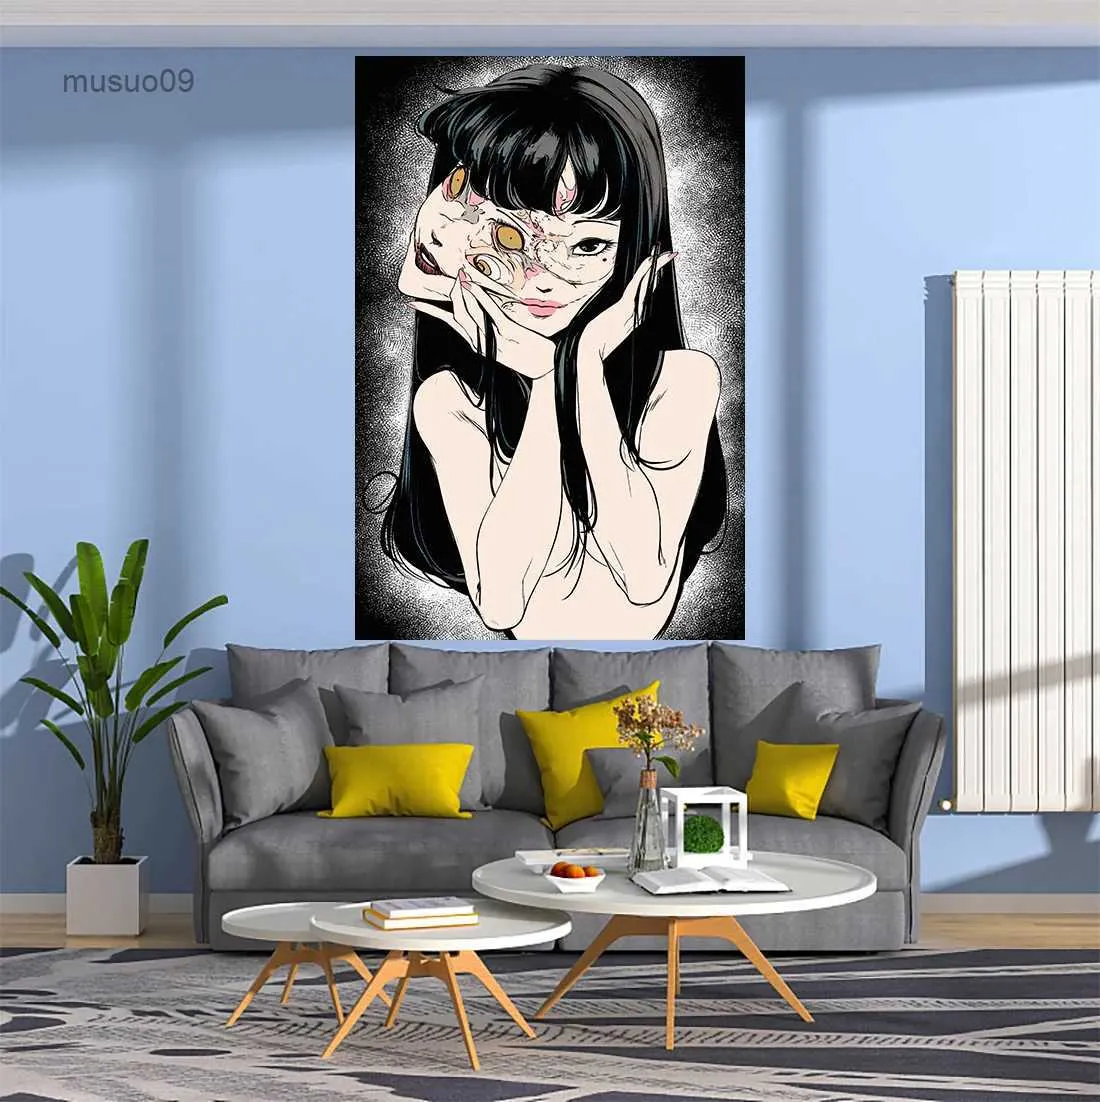 Tapestries Horror Anime Tomies Tapestry Junji Ito Collection Print Affischer Vintage Room Bar Cafe Decor Diy Art Wall Painting